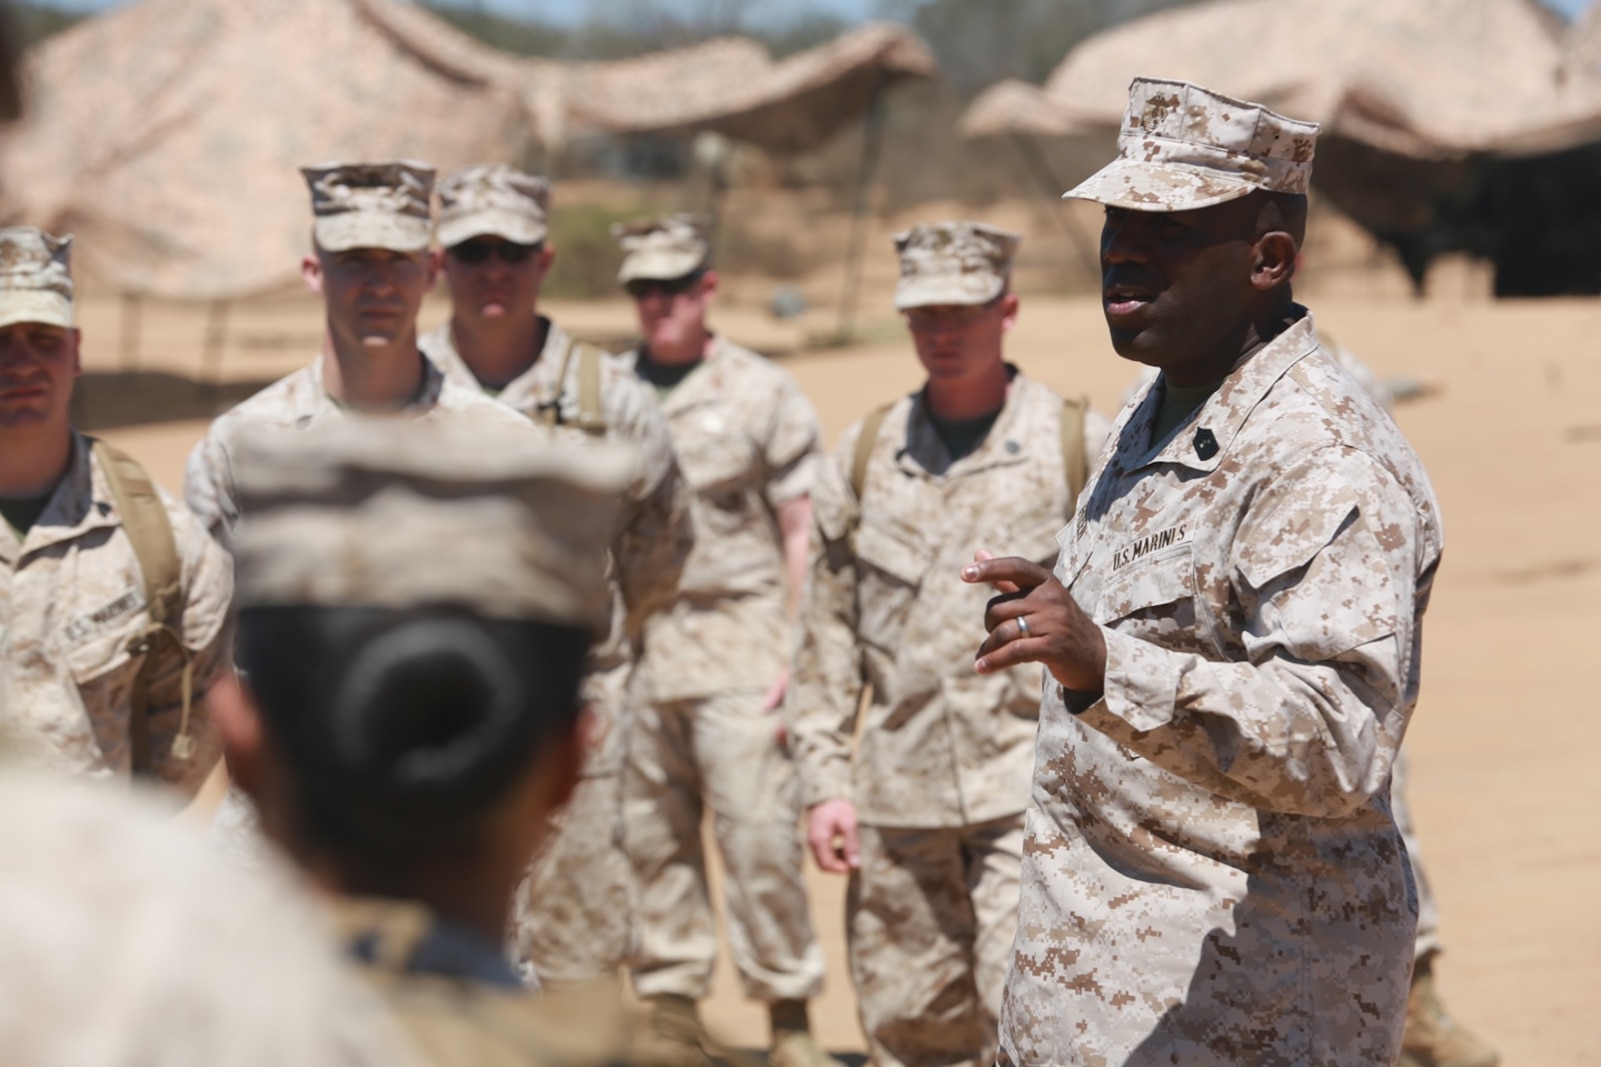 The 18th Sergeant Major of the Marine Corps, Ronald L. Green, speaks with Marines of Combat Logistics Battalion 15, Headquarters Regiment, 1st Marine Logistics Group, during a Tactical Convoy Course on Camp Pendleton Calif., Aug. 16, 2016. Sergeant Major Green discussed issues with in the Marine Corps and protecting that you earn. (Official U.S. Marine Corps photo by Sgt. Rodion Zabolotniy)